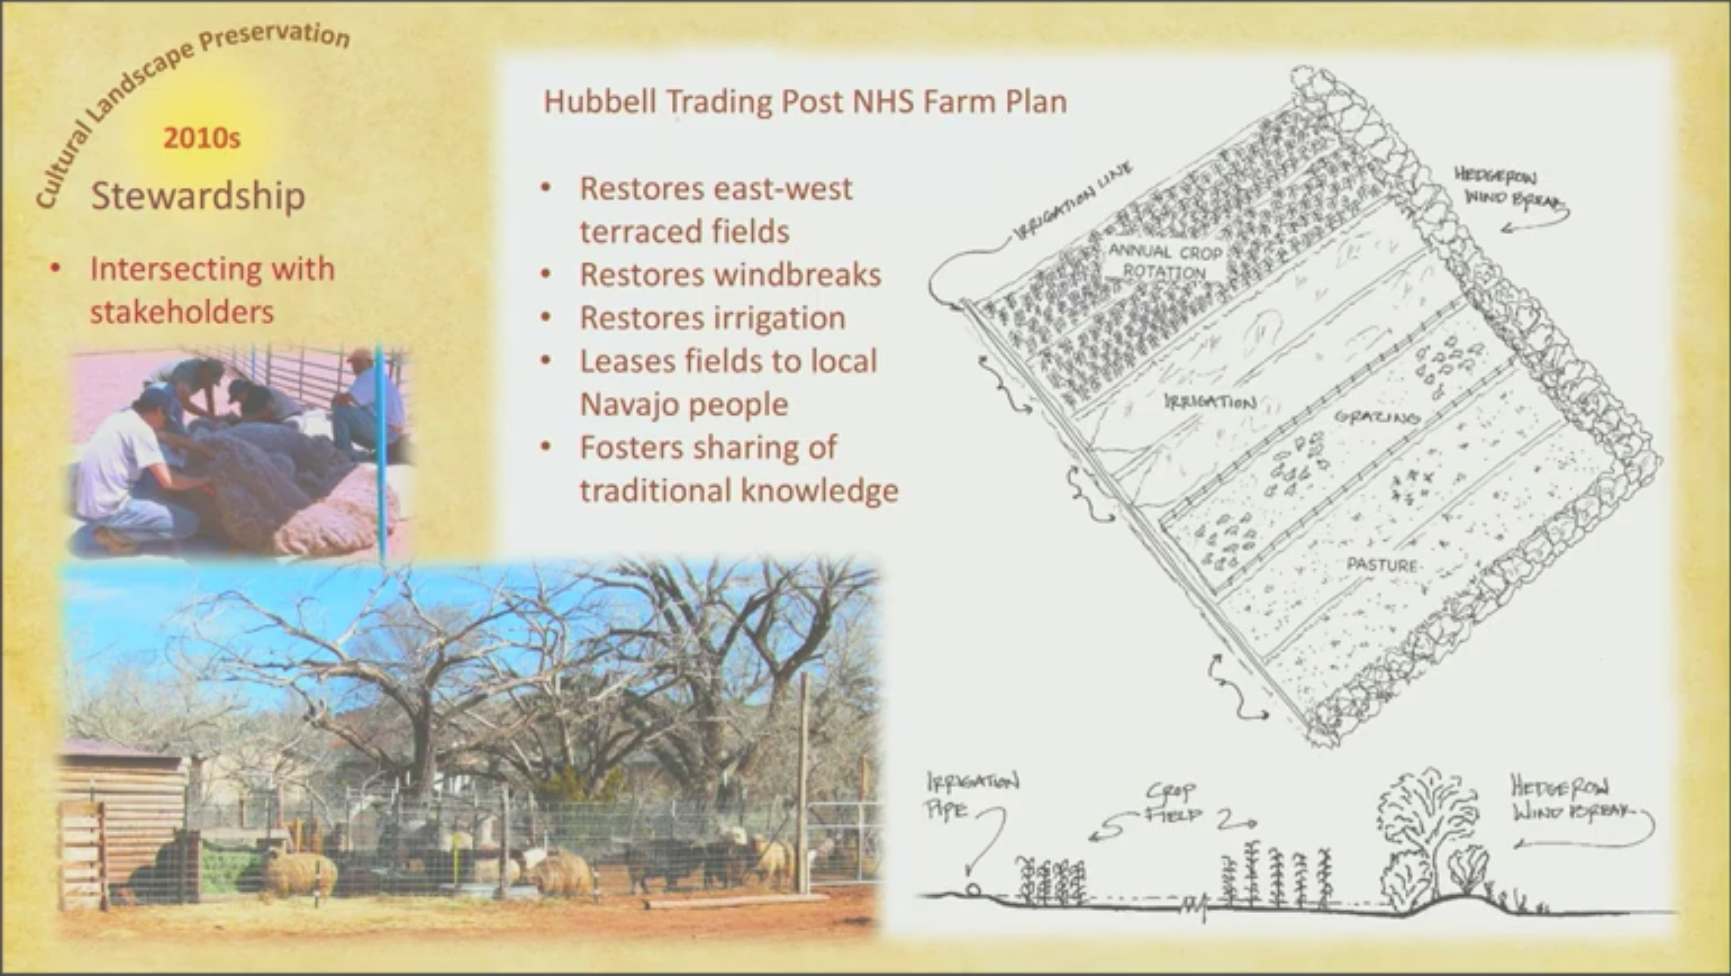 Drawing of the Hubble Trading Post NHS Farm Plan.